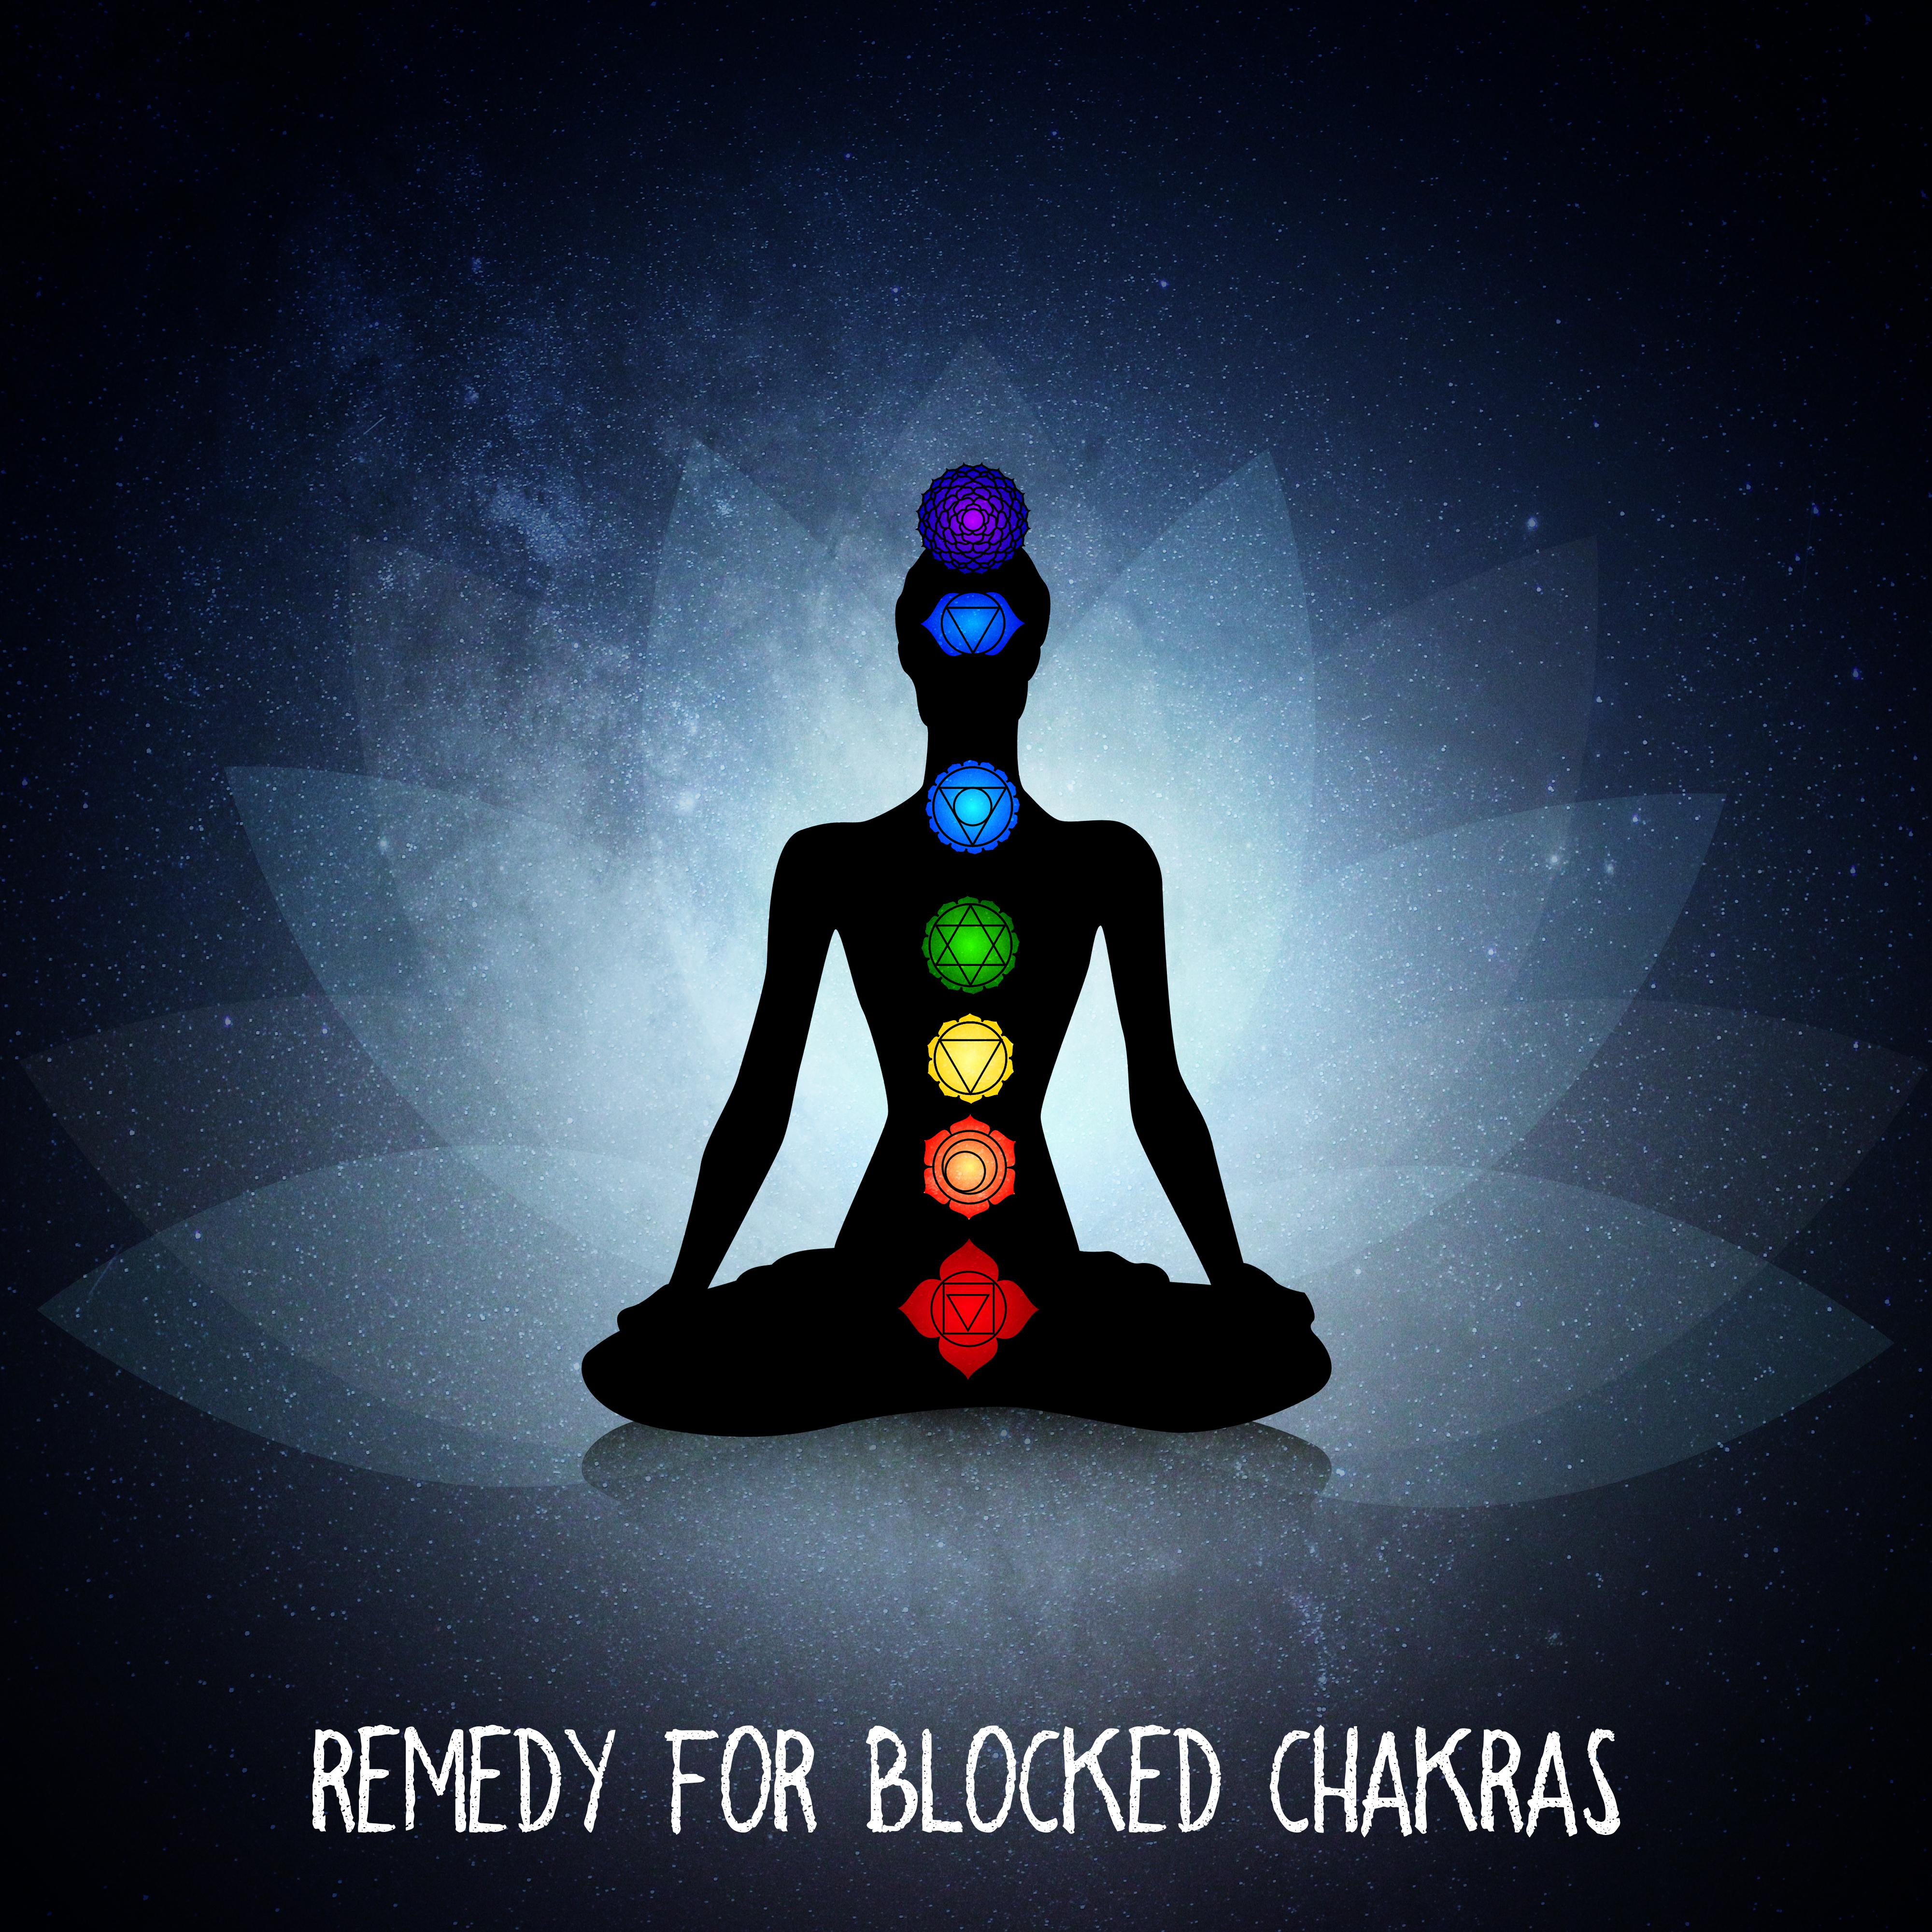 Remedy for Blocked Chakras - Music for Healing and Cleansing Meditation That’ll Help You Unlock and Balance Your Chakras